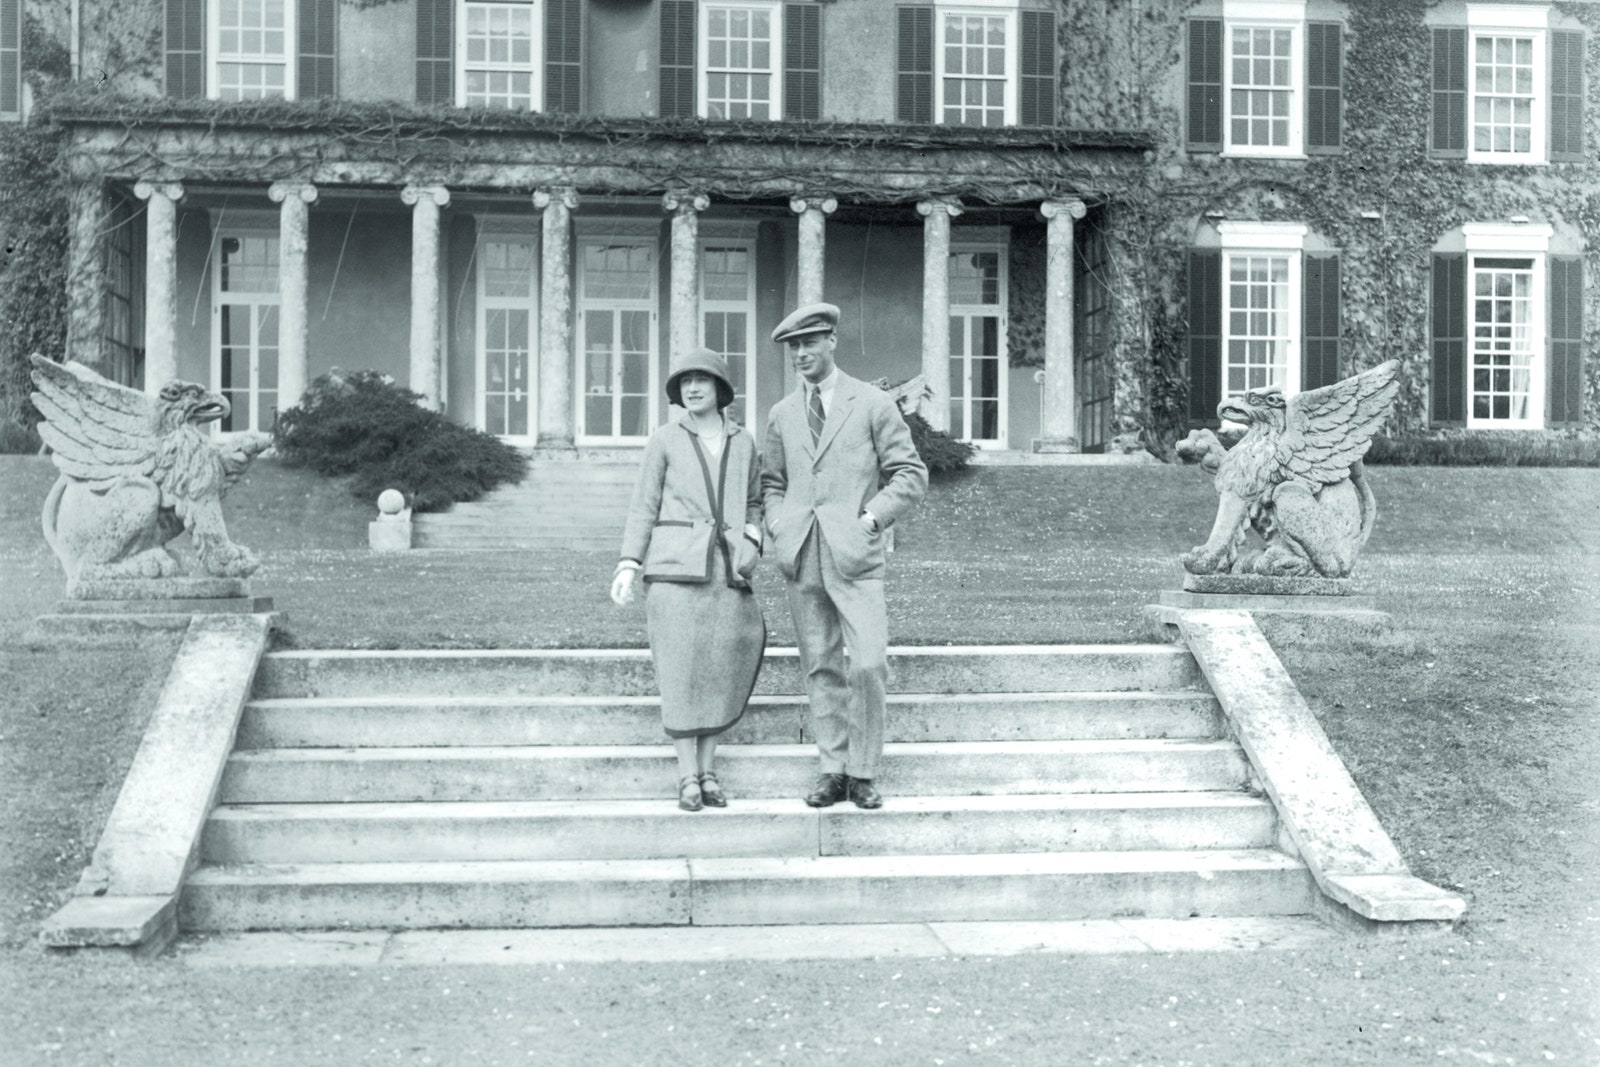 The Duke and Duchess of York on their honeymoon at the Greville estate Polesden Lacey 1923